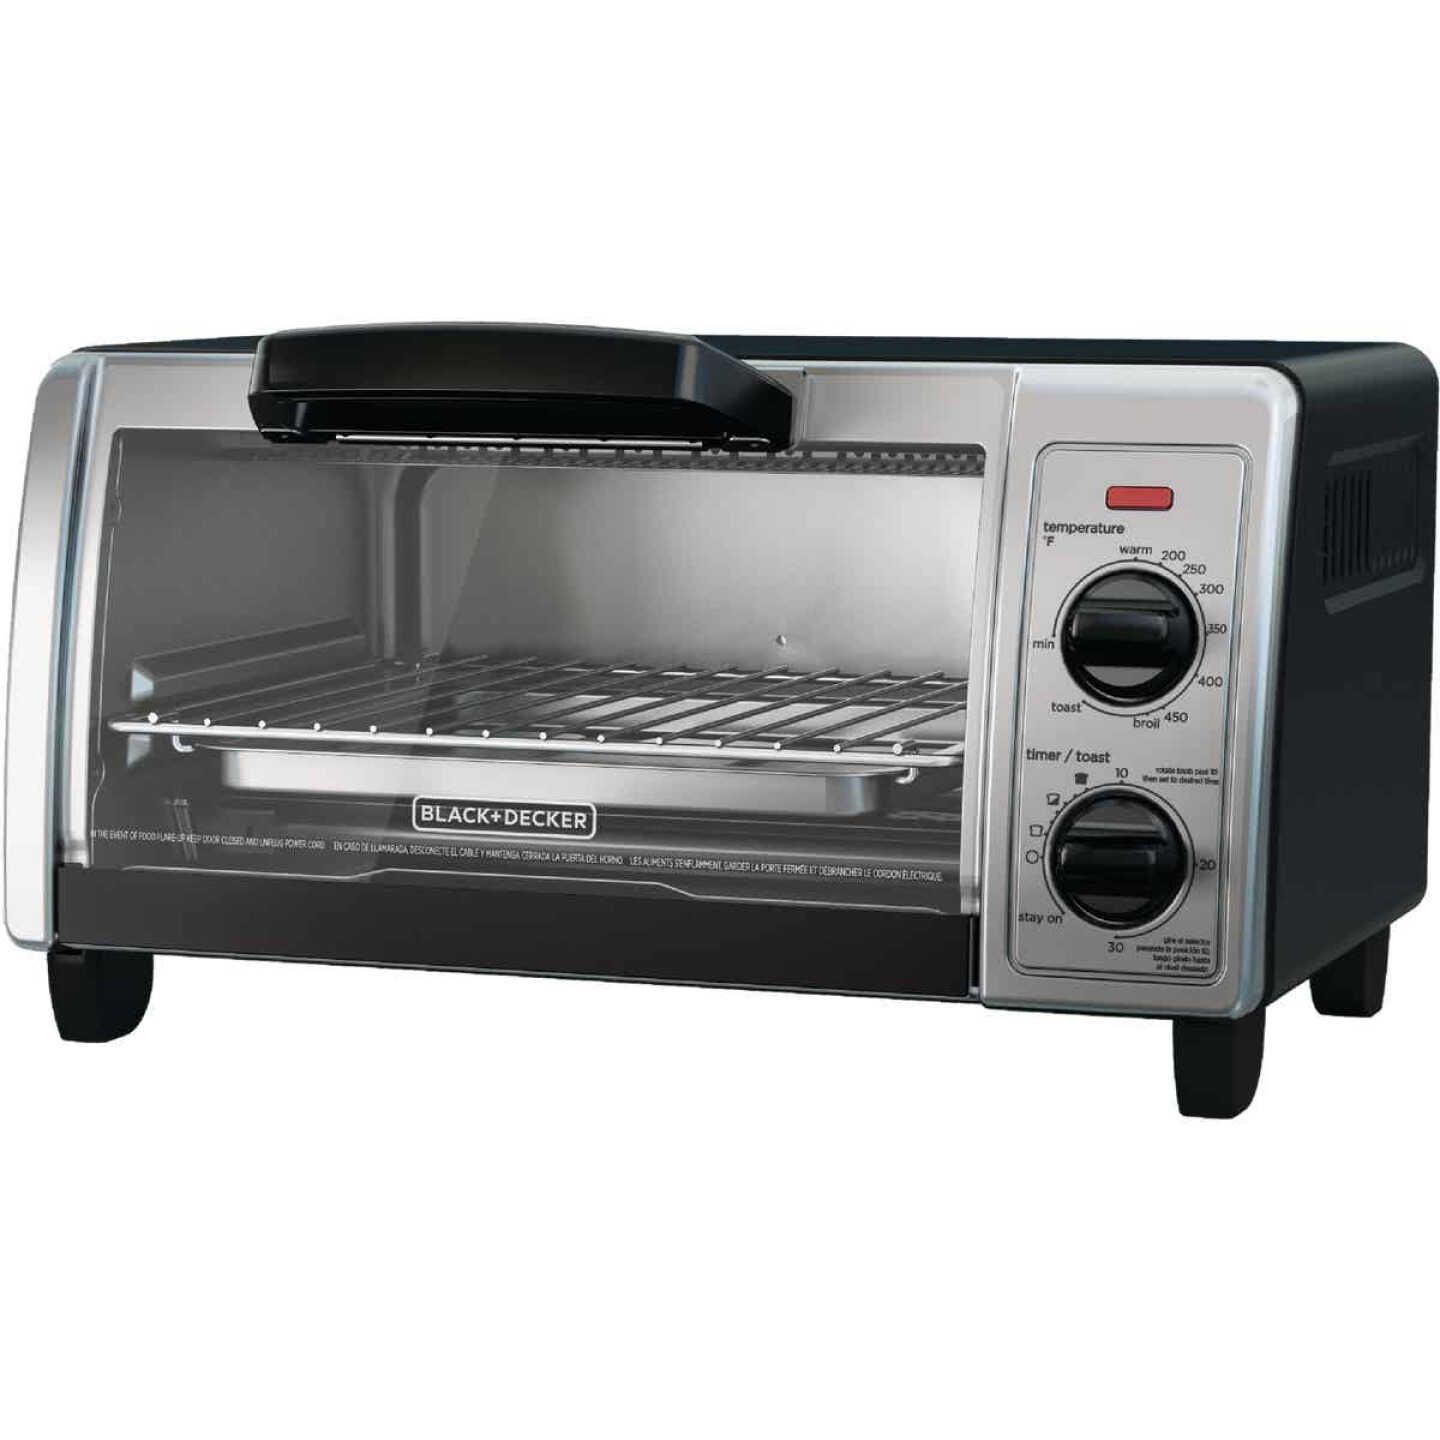 Toaster Ovens for sale in Manchester, Louisiana